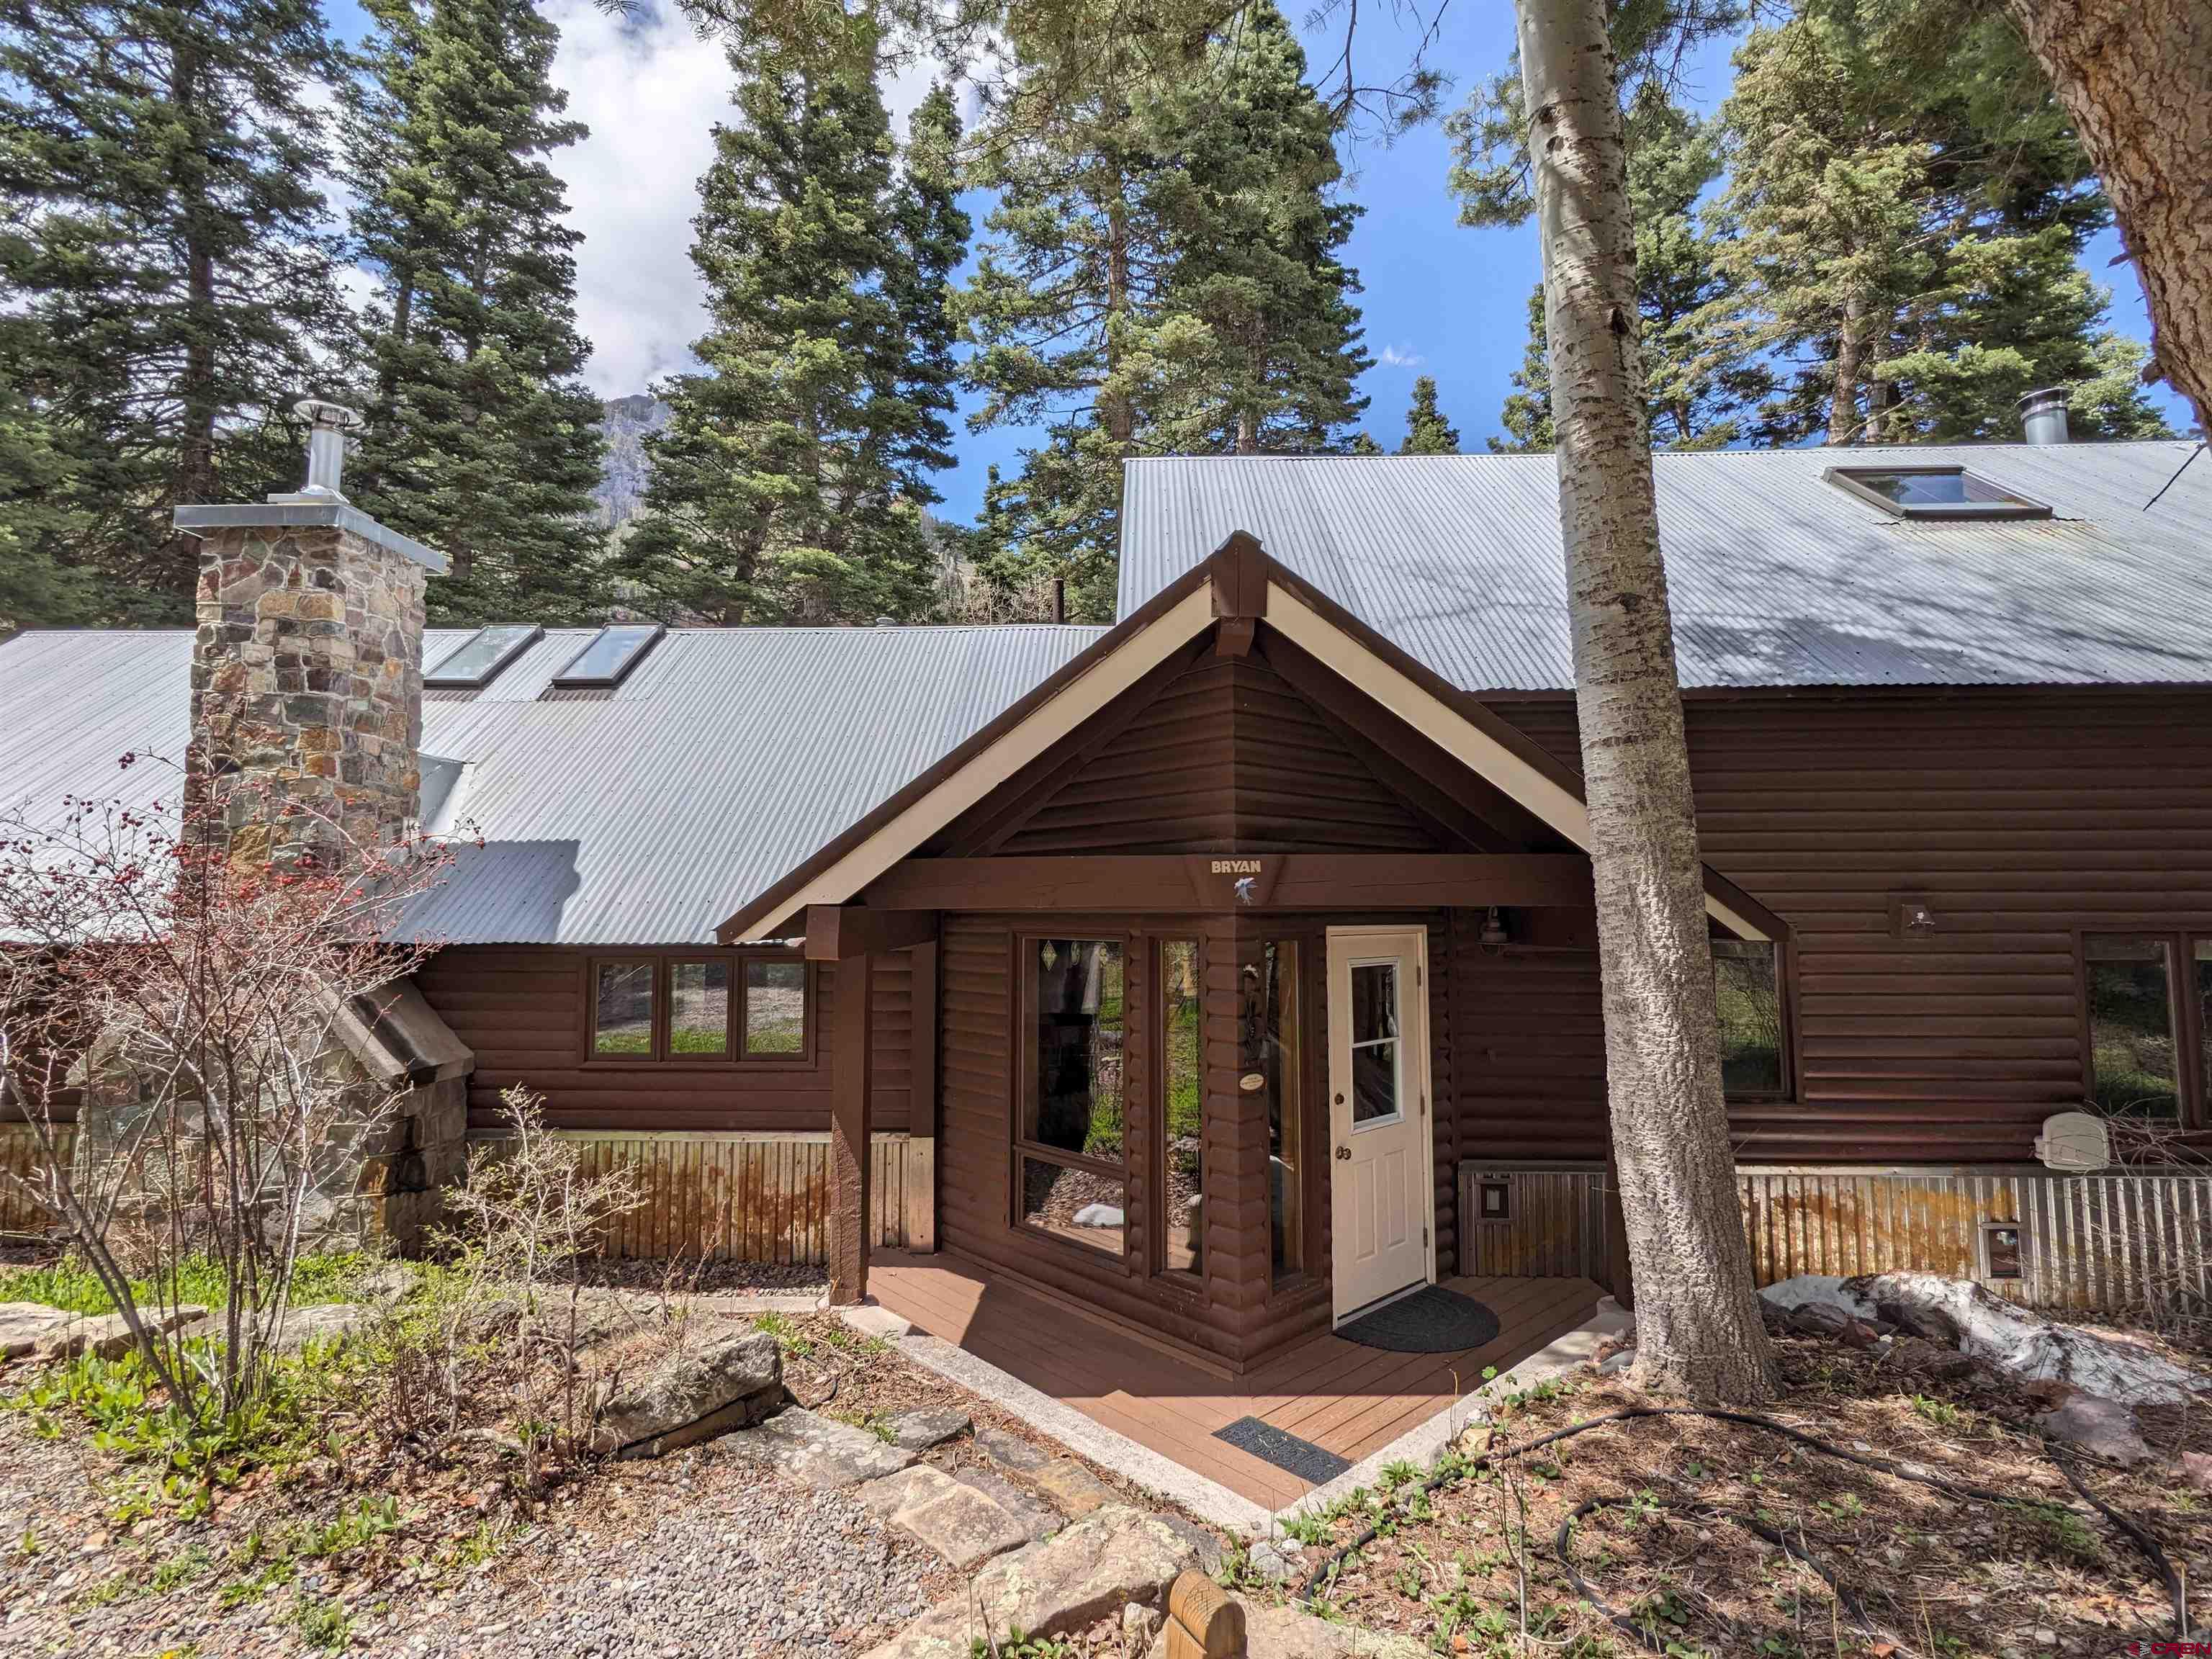 This cozy cabin is located in the popular Mineral Farms neighborhood south of Ouray, Colorado. The original cabin was built in 1959 and the addition was added in 1989. As you enter the house you are greeted by a nice light and bright entryway leading to the kitchen. The kitchen has all new appliances and a cellar accessible via the trap door in the kitchen. The dining room and living room are apart of the original cabin. There is a stacked stone wood burning fireplace (replaced in 2022), screened in covered back porch, a guest bathroom and two guest bedrooms off the living area. The laundry is located off the hallway leading to the primary suite. The primary bathroom has a bathtub, shower, two vanities and a separate toilet area. The suite is very spacious with a seating area, walk in closet, wood burning fireplace, windows and private screened in covered porch. Above the master is an amazing studio loft with beautiful beams, lots of windows, skylights, a half bathroom and a lot of storage room. The two car heated garage was built in 1997. It's oversized and has room for their current woodworking area in the back as well as a utility sink. Above the garage is an ADU with a kitchen bar area, bathroom with a shower and storage room. The house sits on one acre with big mature Aspen and Pine trees. Lots of different wildlife visit this property including, deer, fox, bobcats, turkeys and lots of other birds. The property owners have access to the Mineral Farms ponds for fishing and relaxing. Guests are welcome as well but must be accompanied by the property owner. Short term rentals are allowed on this property but are subject to the counties rules and restrictions. Come see what this peaceful property has to offer you!